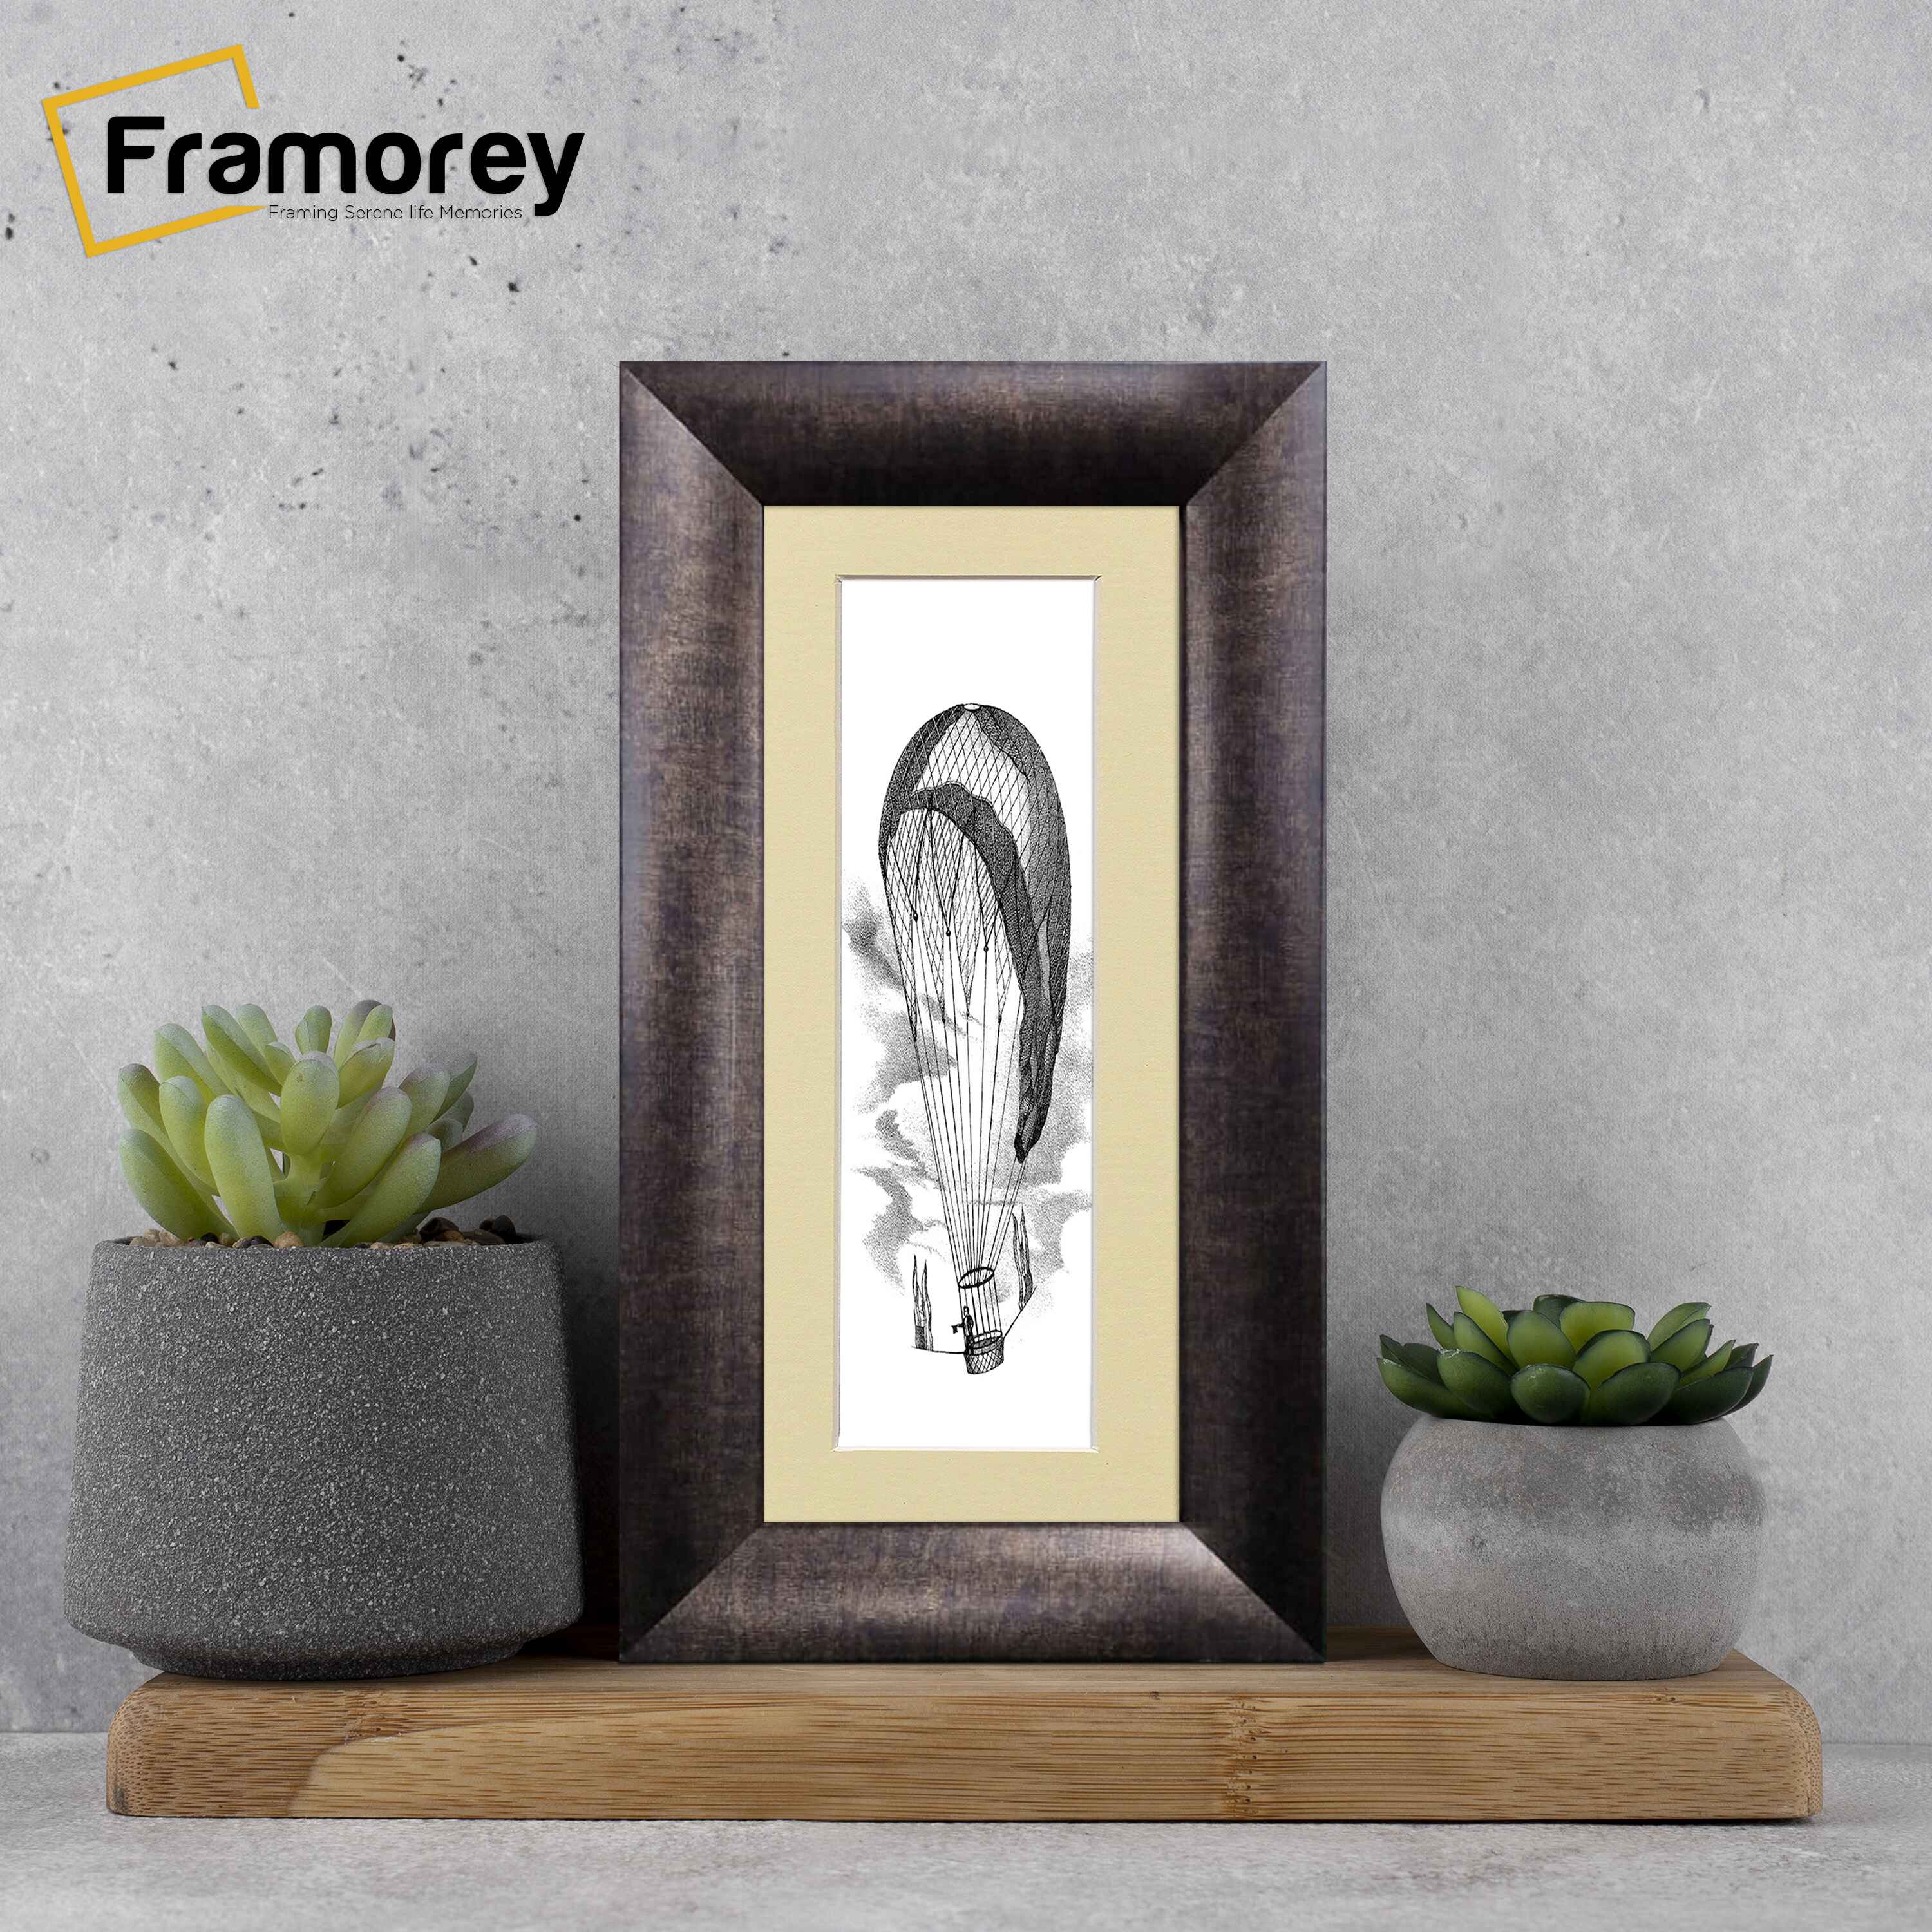 Panoramic Size Brushed Gold Engraved Frames Handmade Poster Frames With Ivory Mount